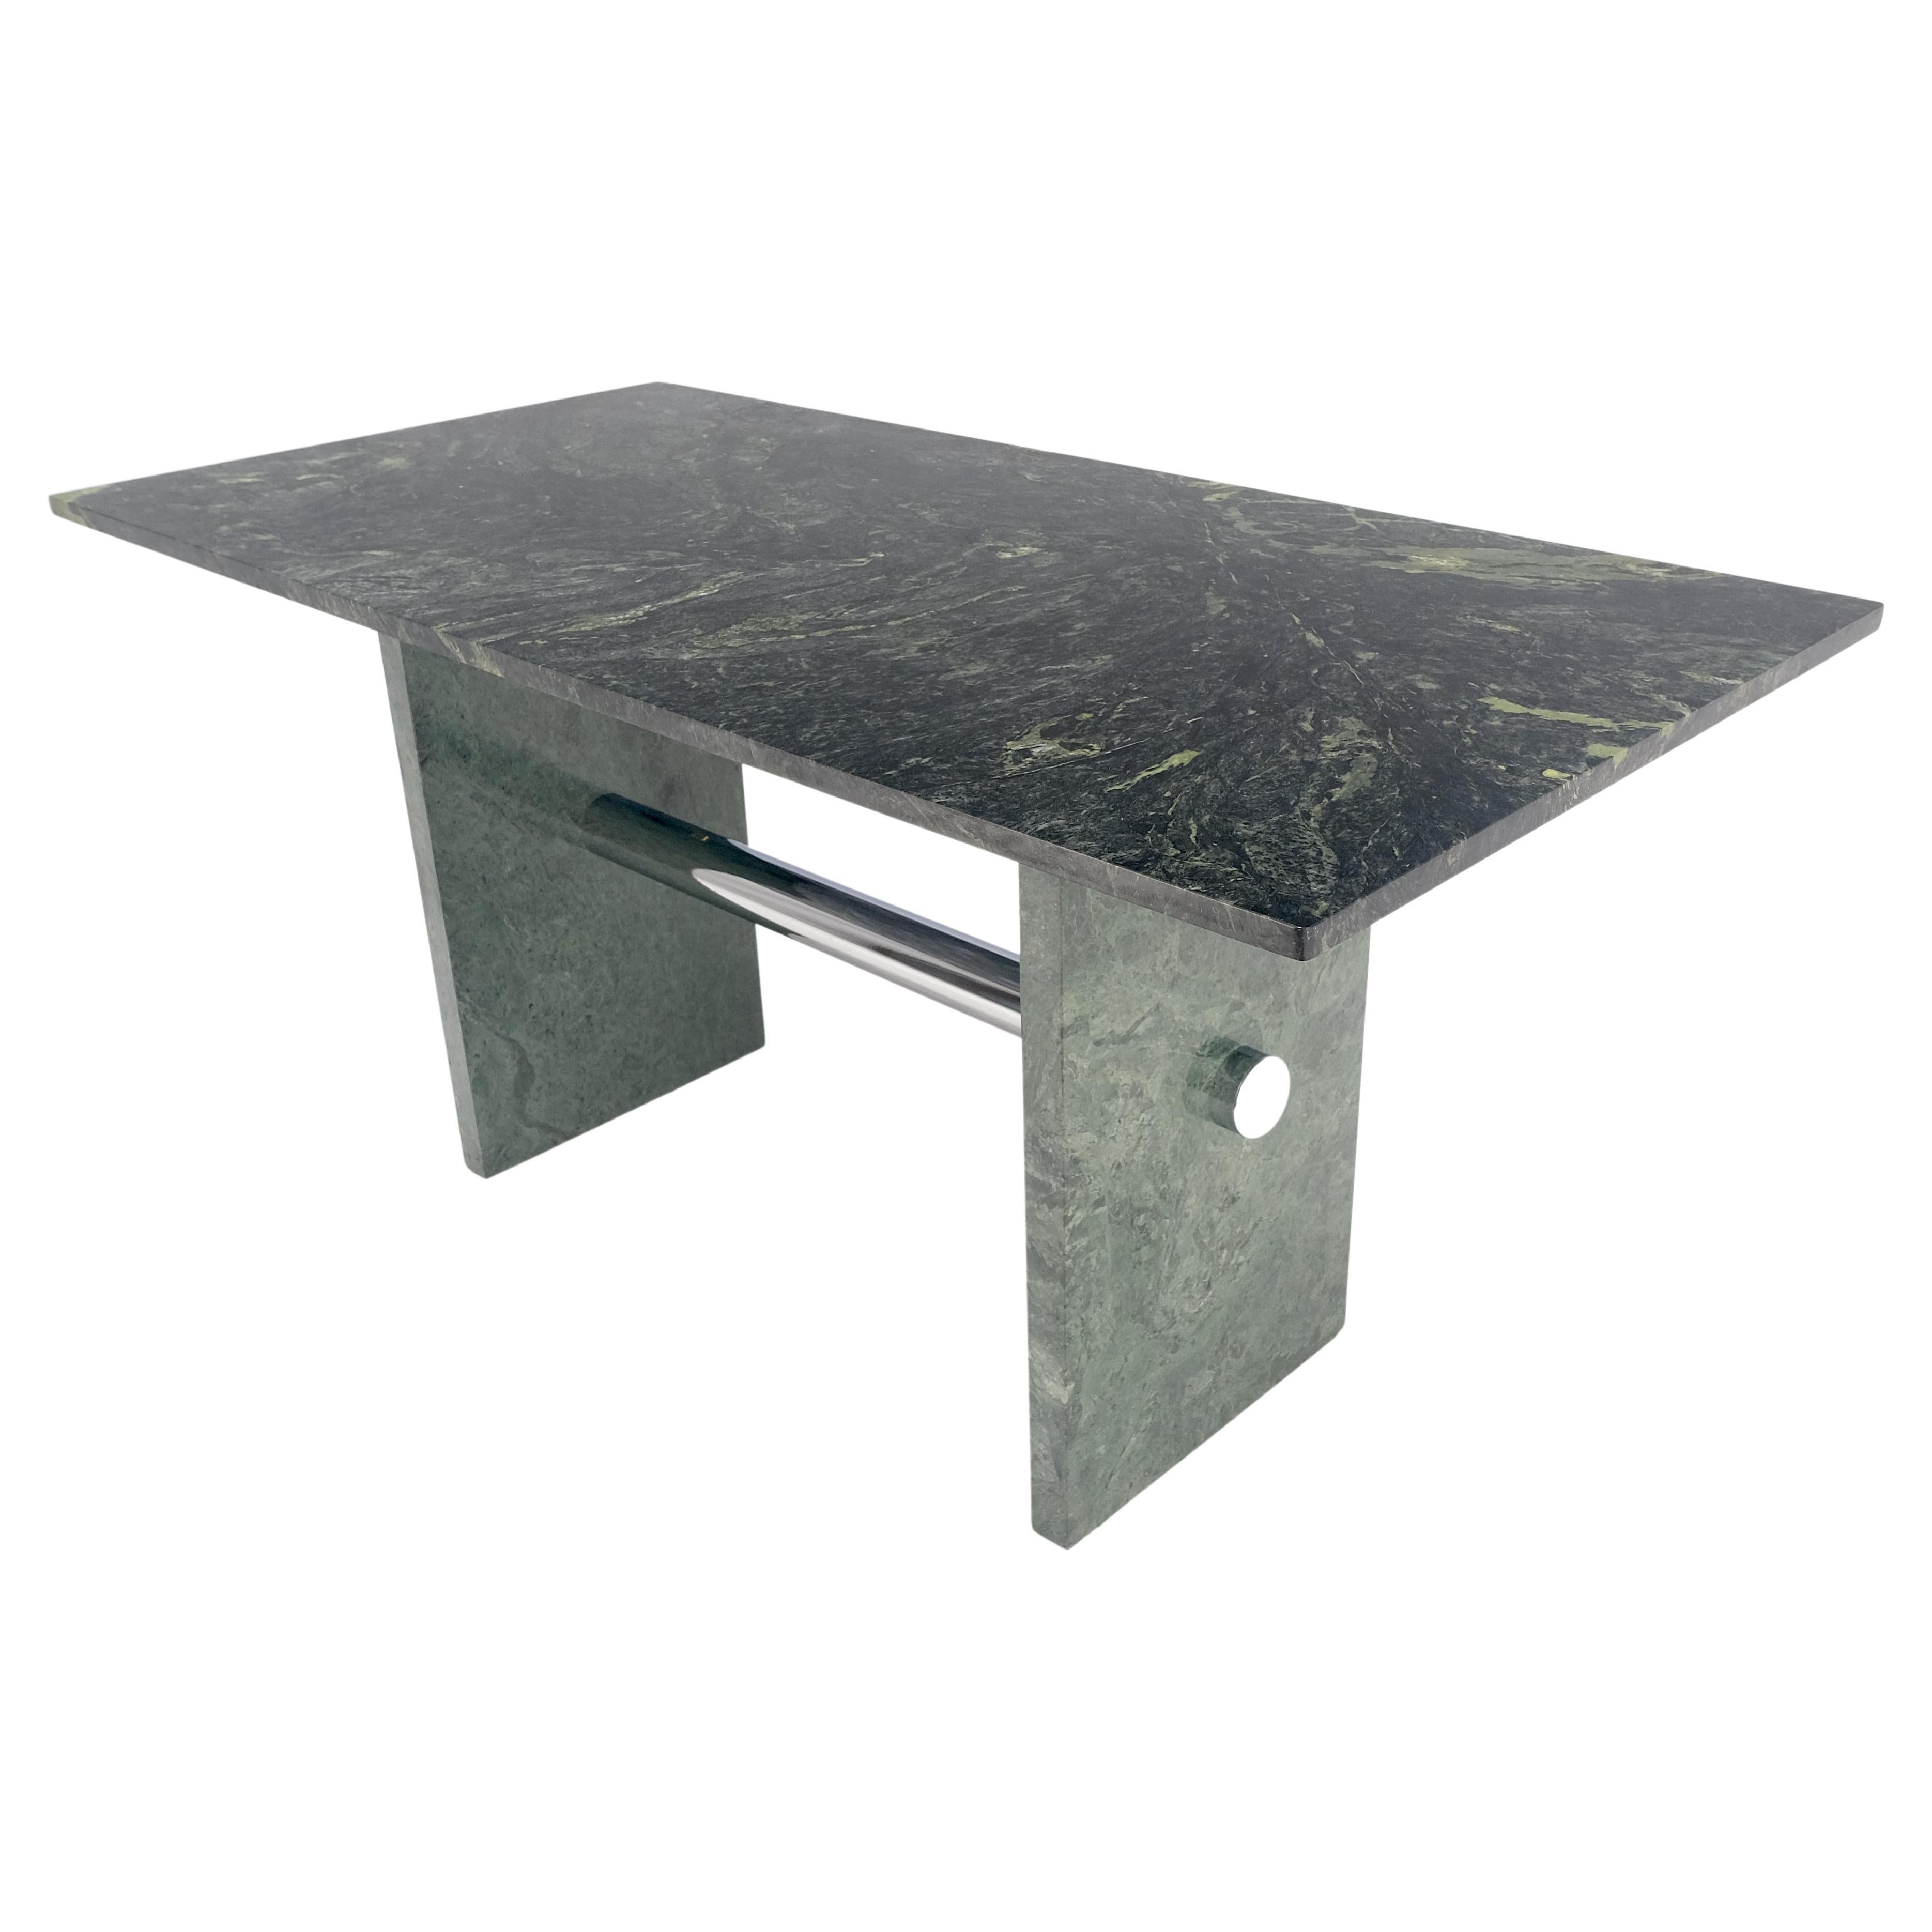 Green Rectangle Marble Top Cylinder Crome Stretcher Base Dining Table Desk MINT! For Sale